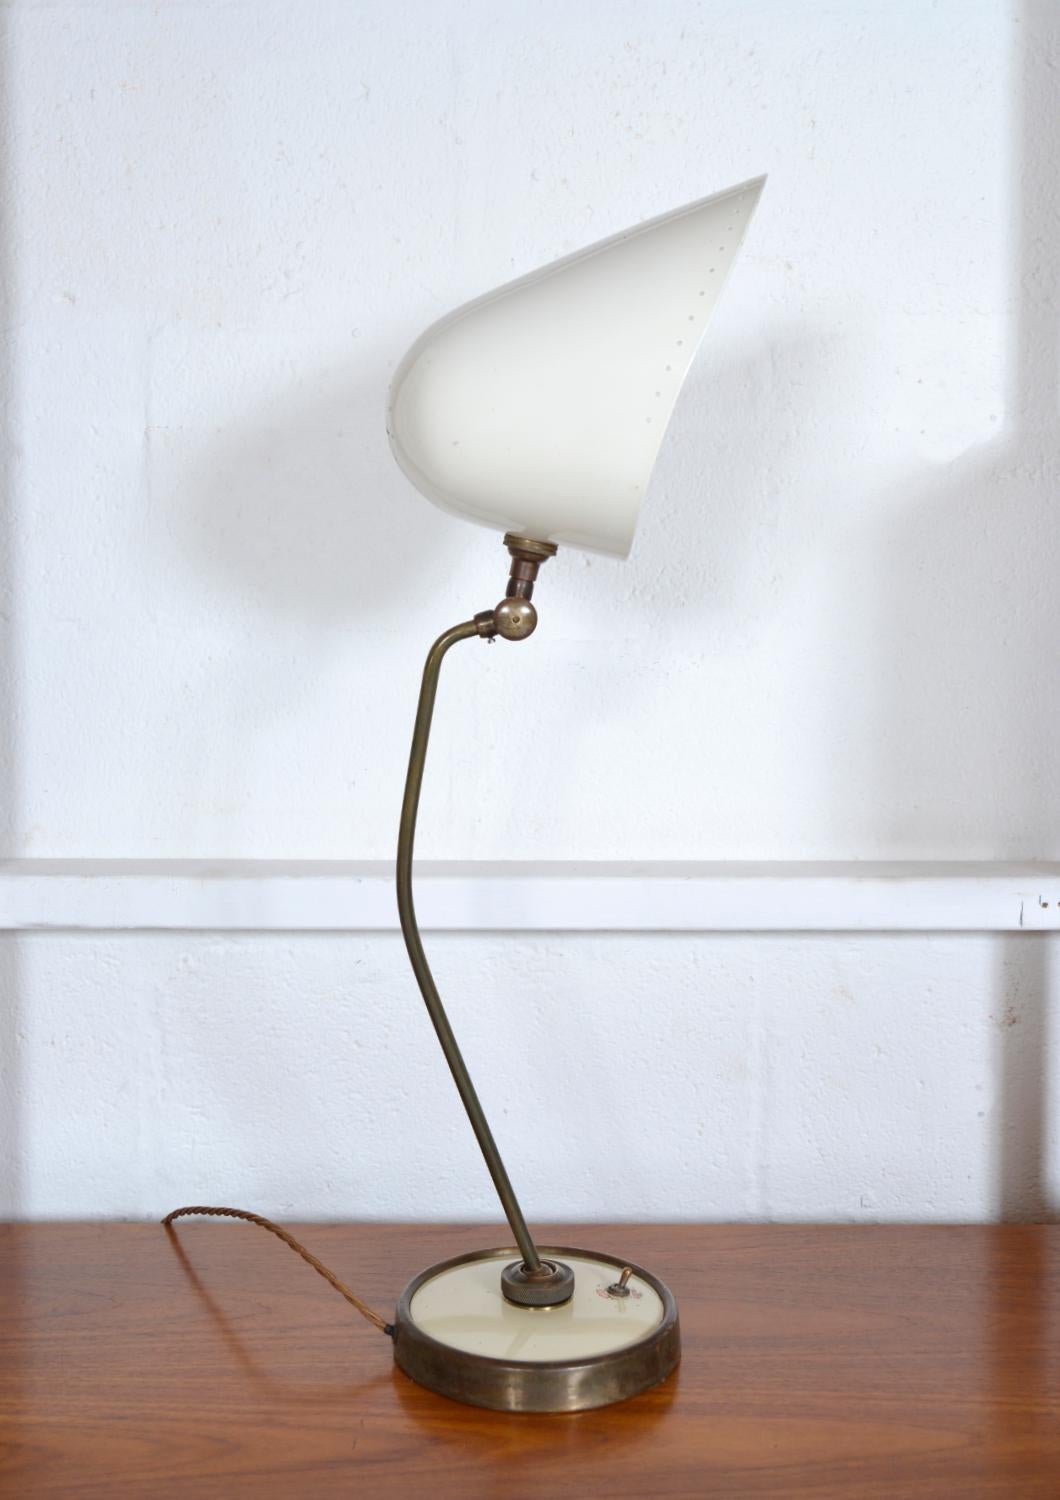 20th Century Midcentury Versalite Desk Lamp by A B Read for Troughton & Young Postwar British